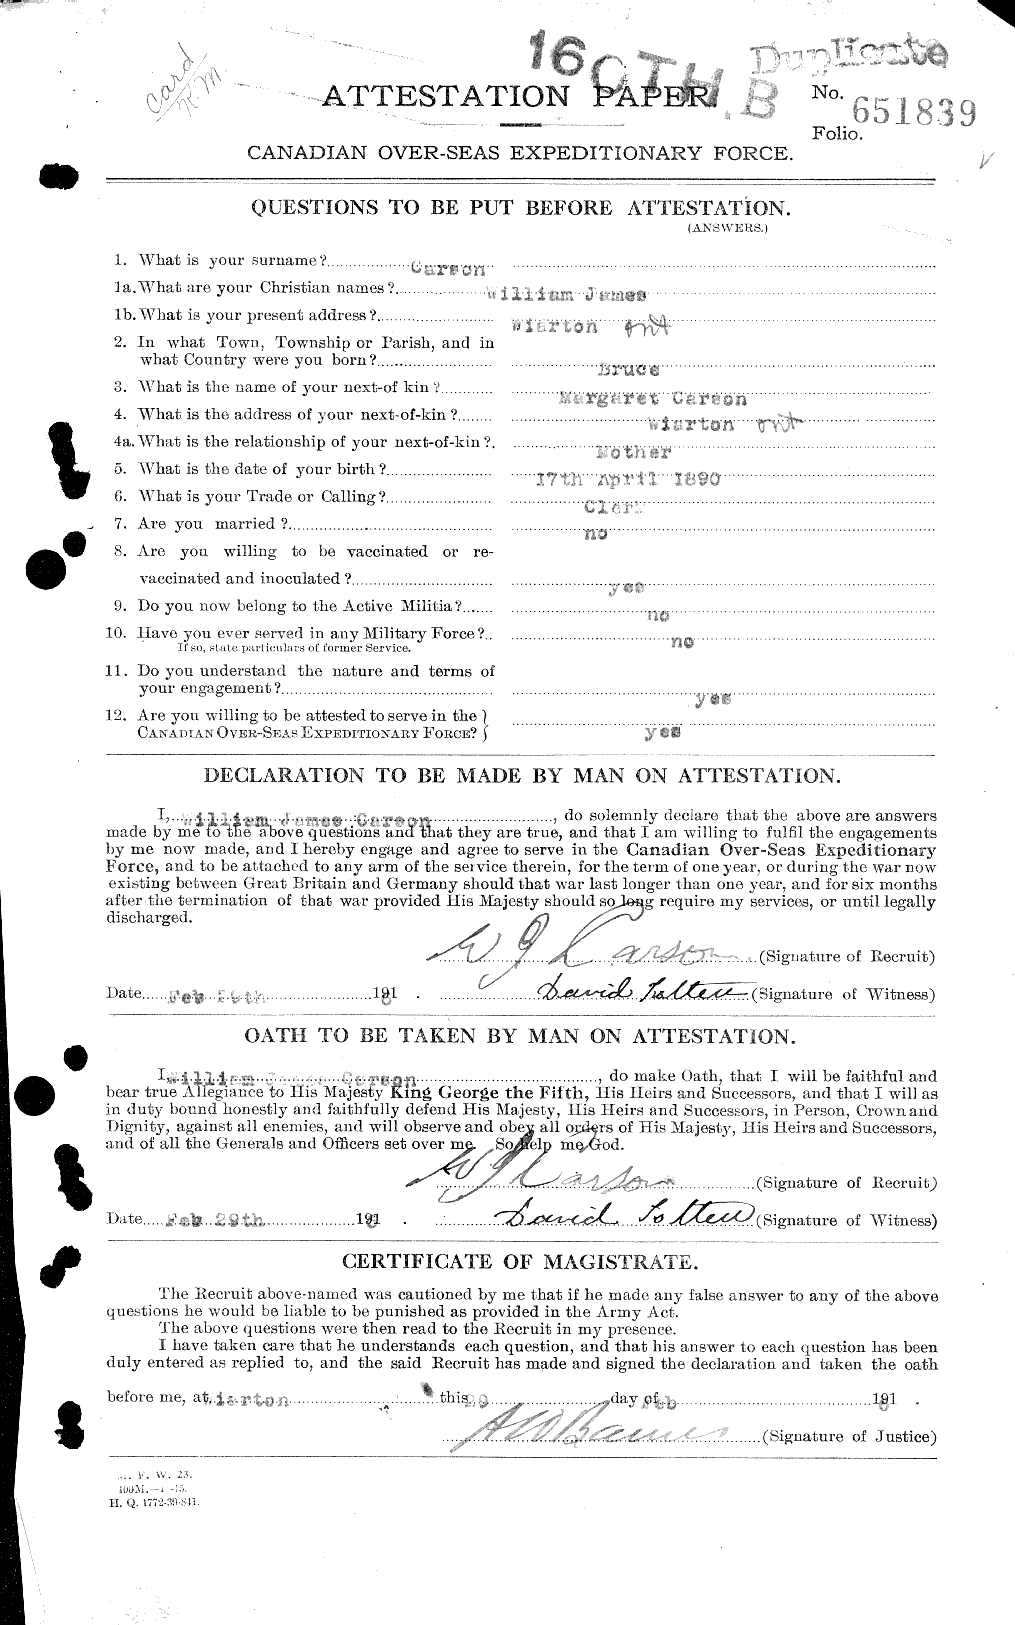 Personnel Records of the First World War - CEF 010873a